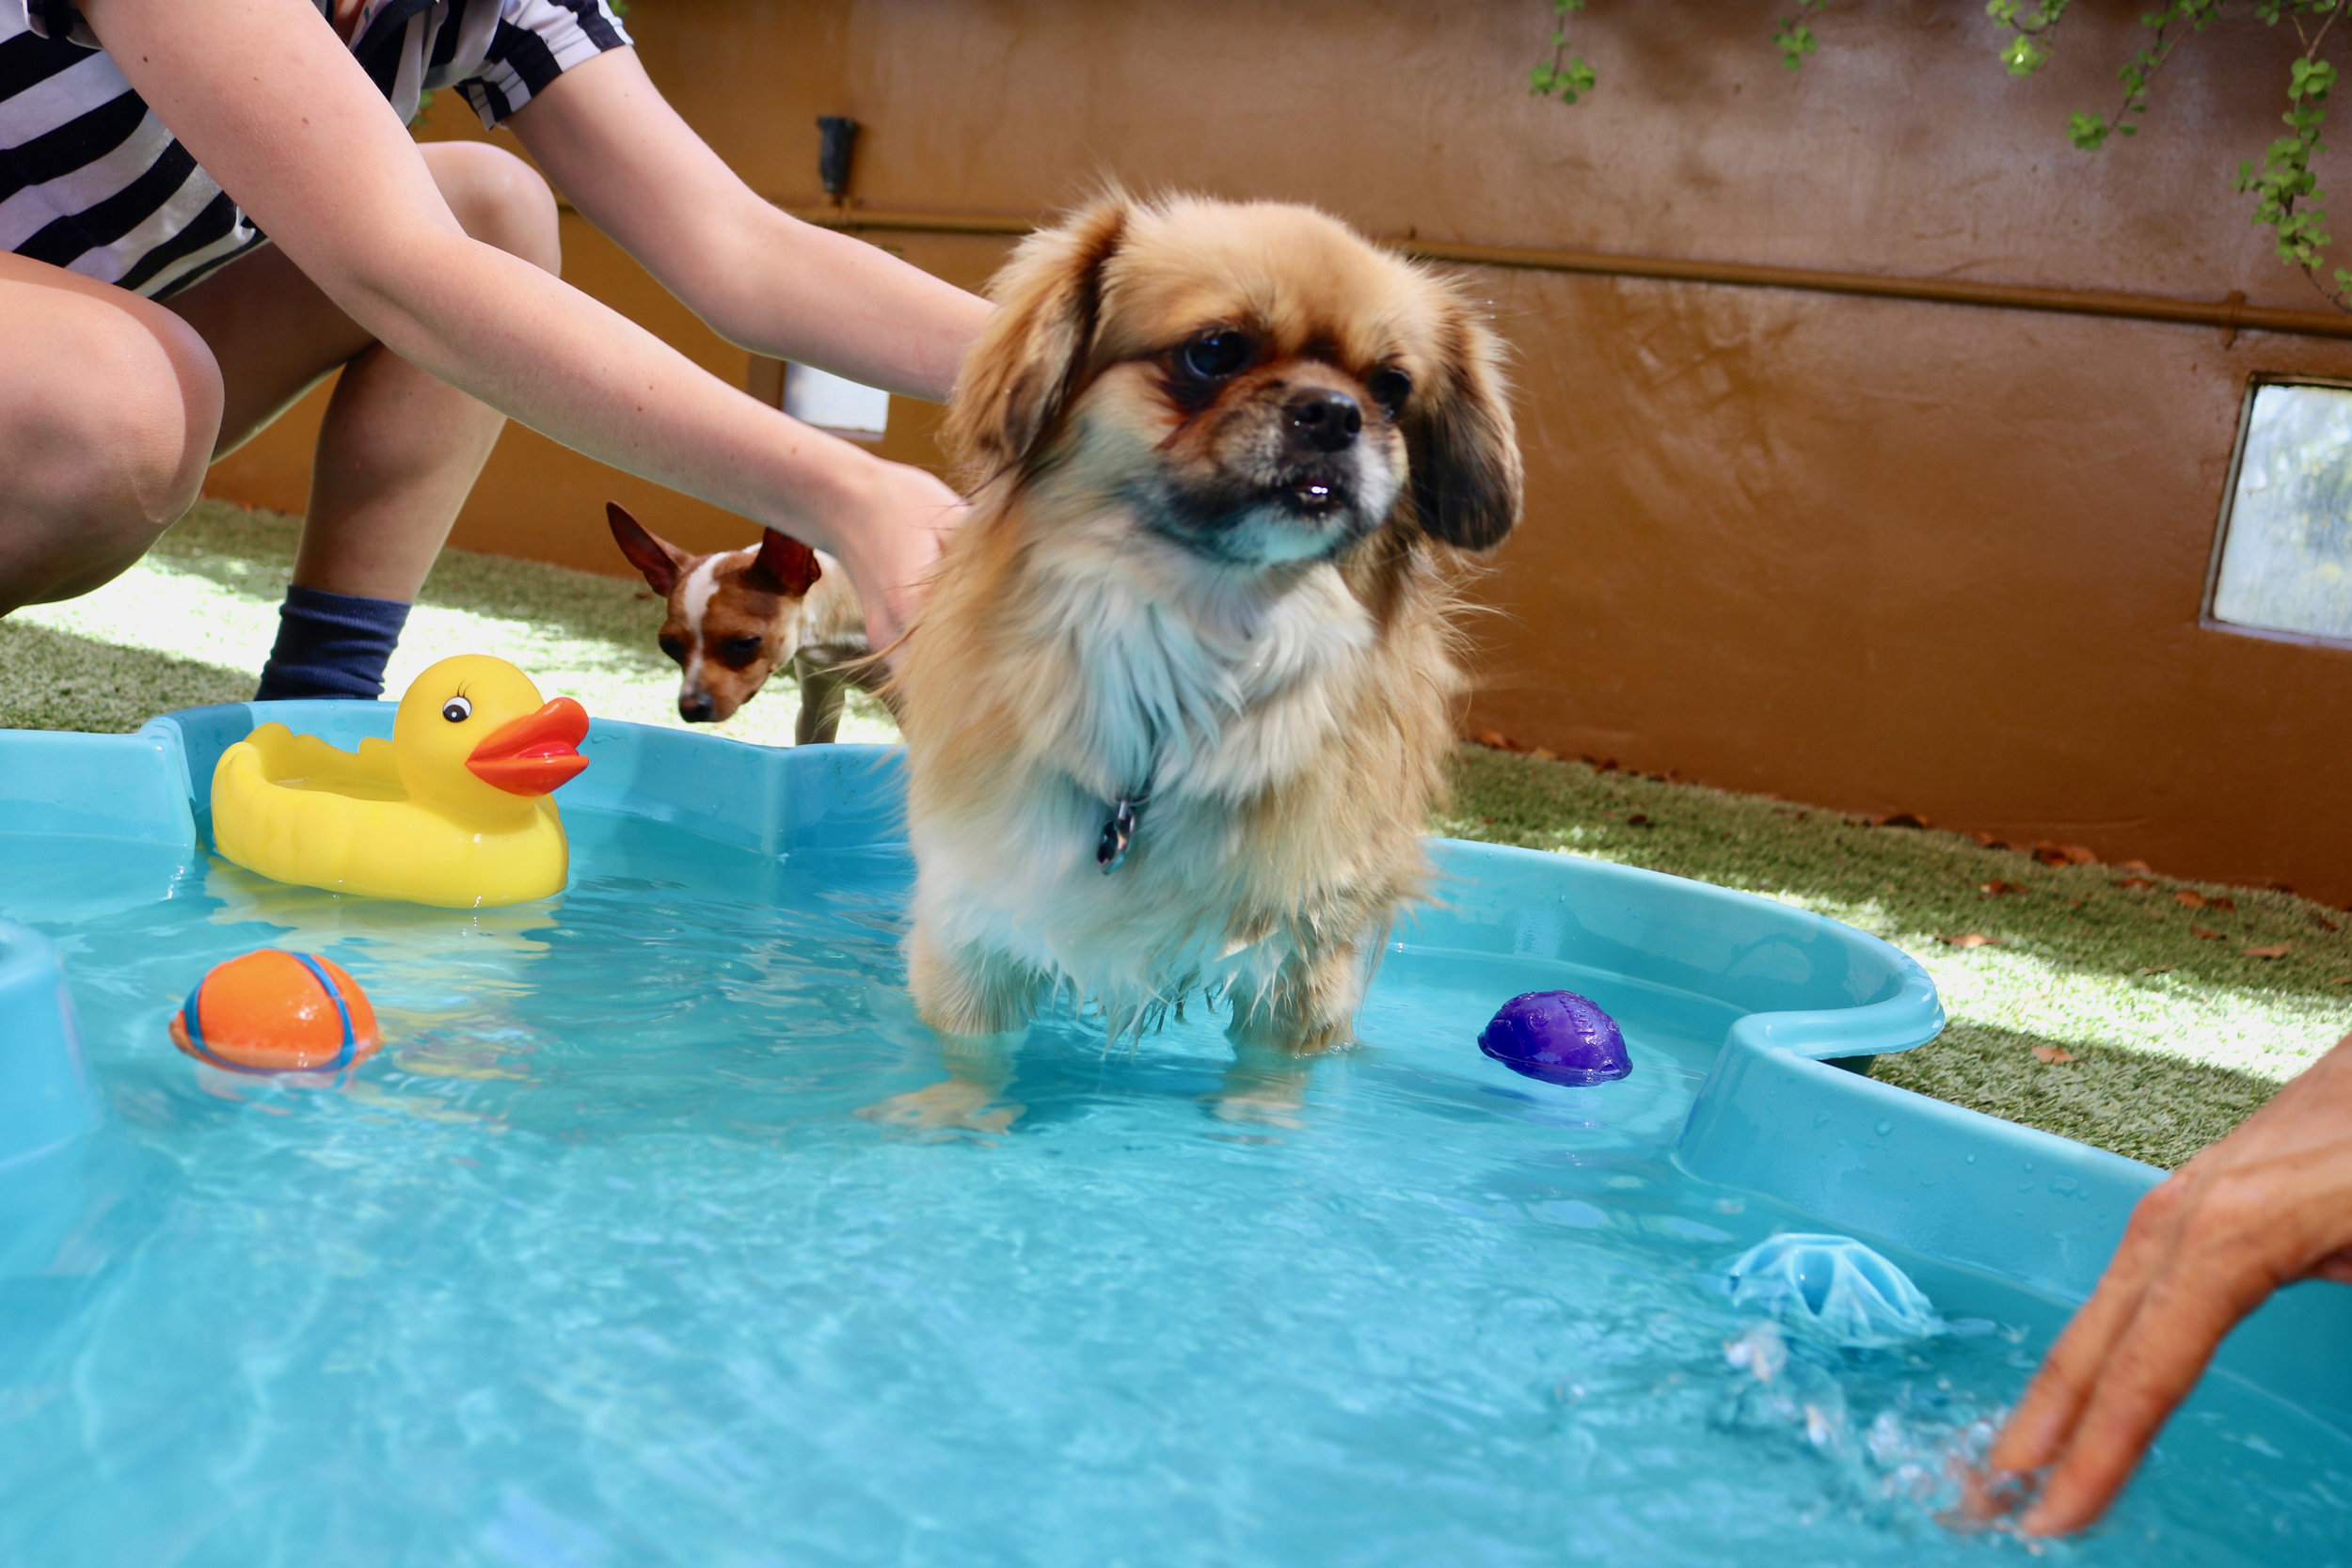 small-dogs-daycare-dog-boarding-pool-cageless3.jpg